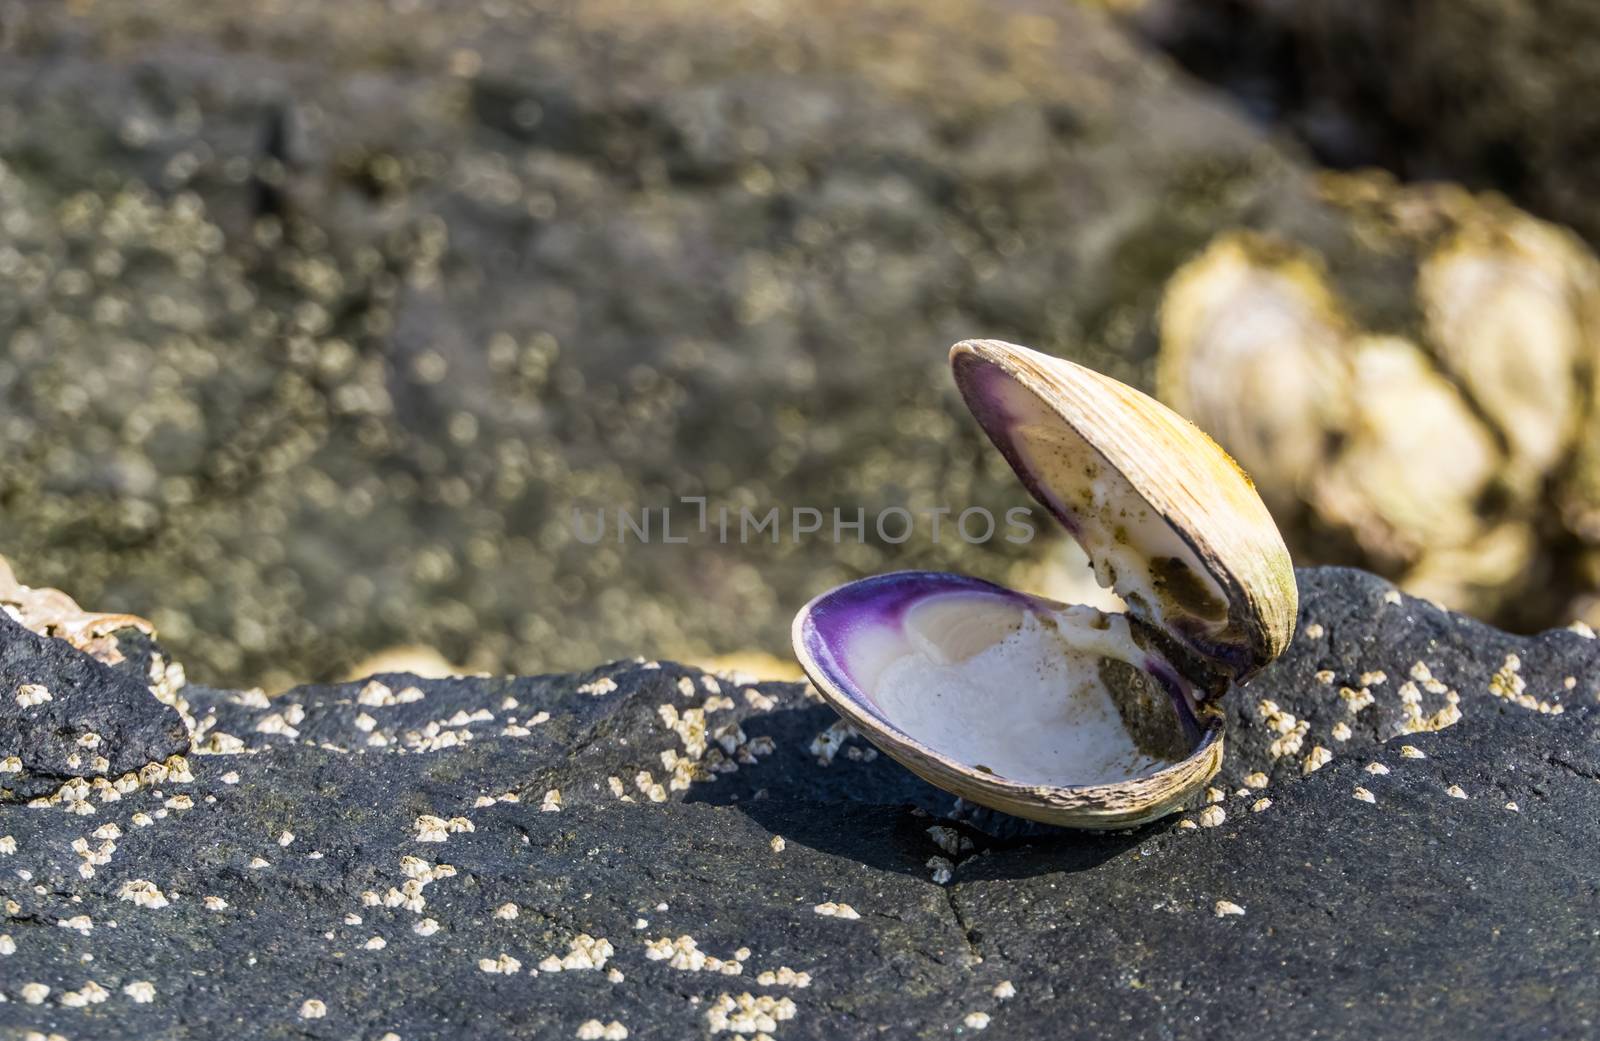 opened seashell in closeup, Beach background, the house of a mollusc, marine life animals by charlottebleijenberg